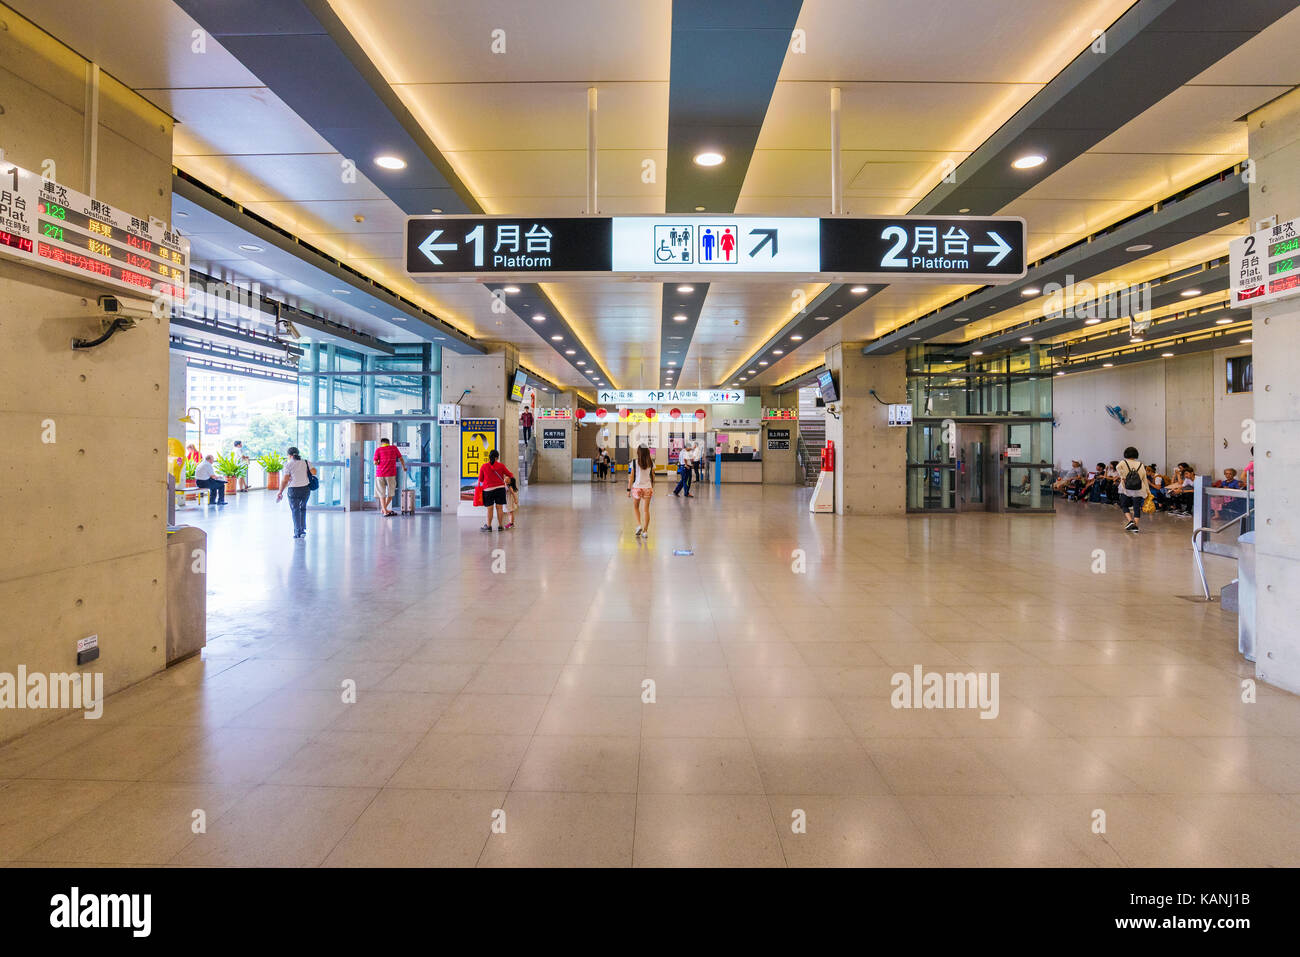 TAICHUNG, TAIWAN - JULY 19: This is the interior architecture of Taichung main station which is located in the downtown area on July 19, 2017 in Taich Stock Photo